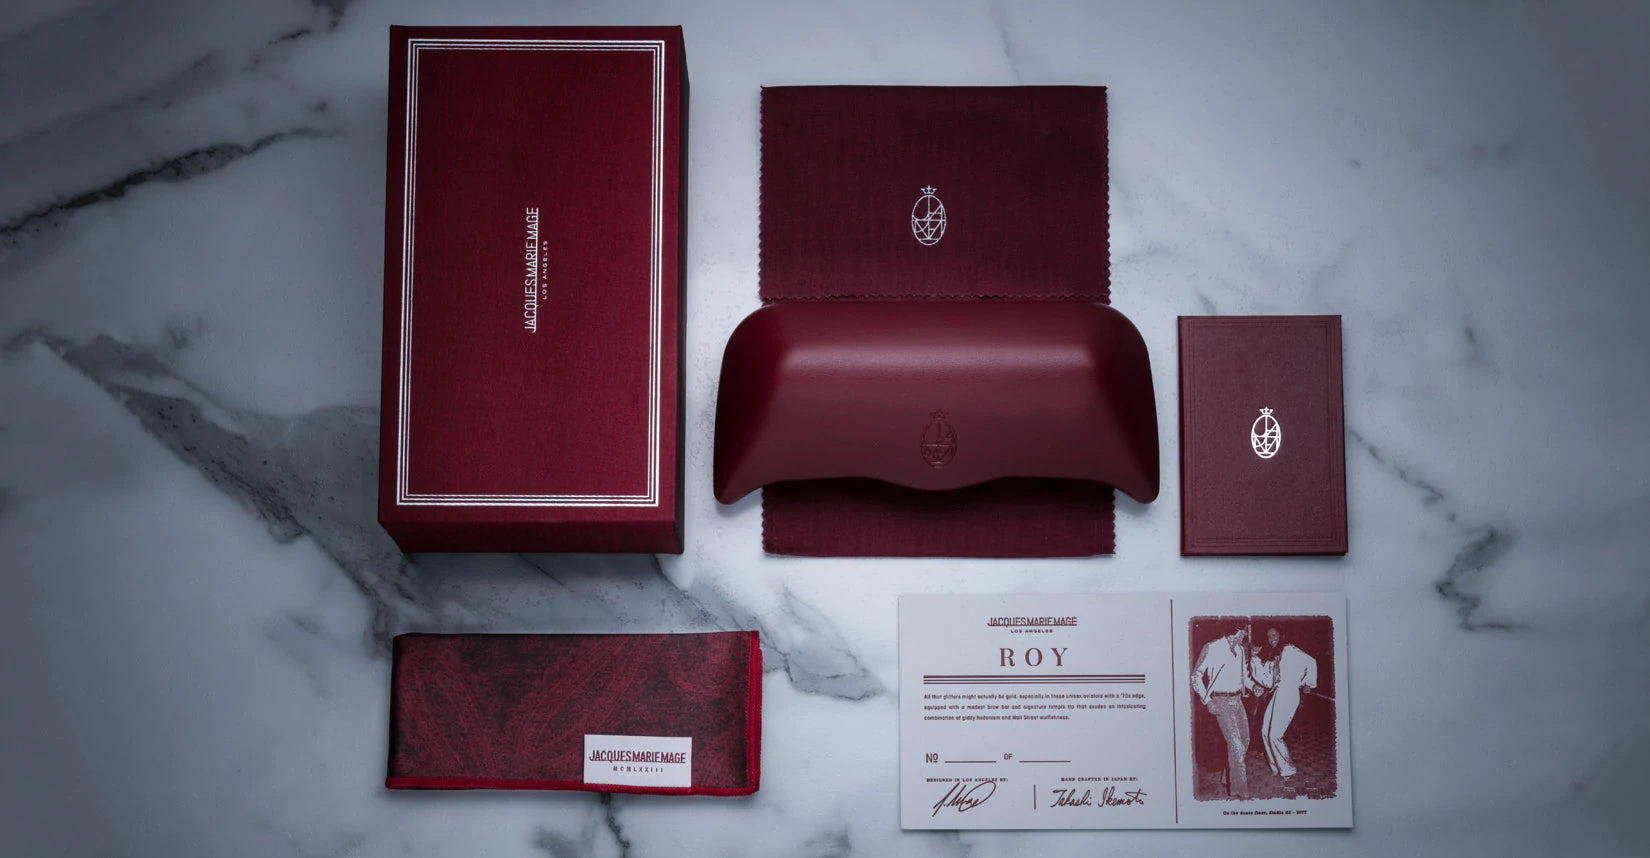 Jacques Marie Mage eyeglass accessories featuring the signature burgundy box, leather clamshell case, and numbered certificate of authenticity.